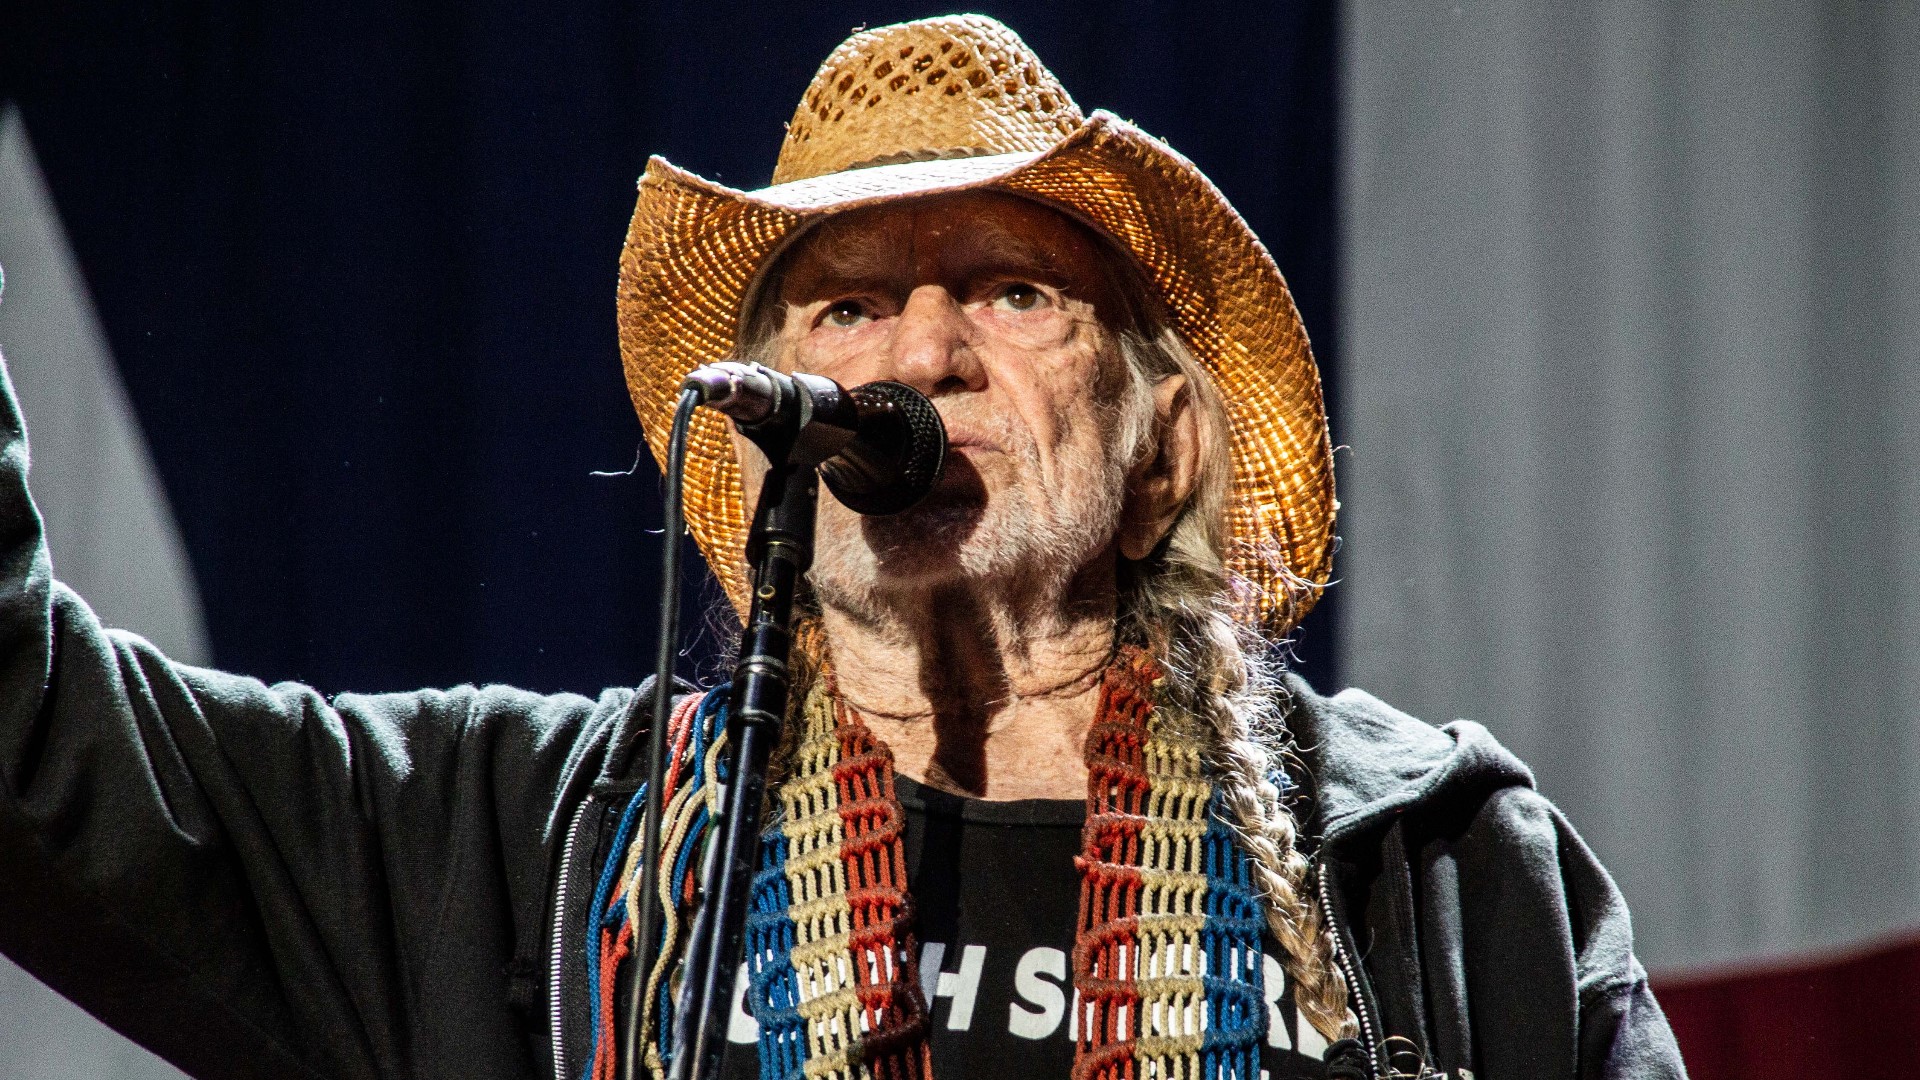 The Outlaw Music Festival and Willie Nelson played on despite the severe heat warnings issues across Arkansas.